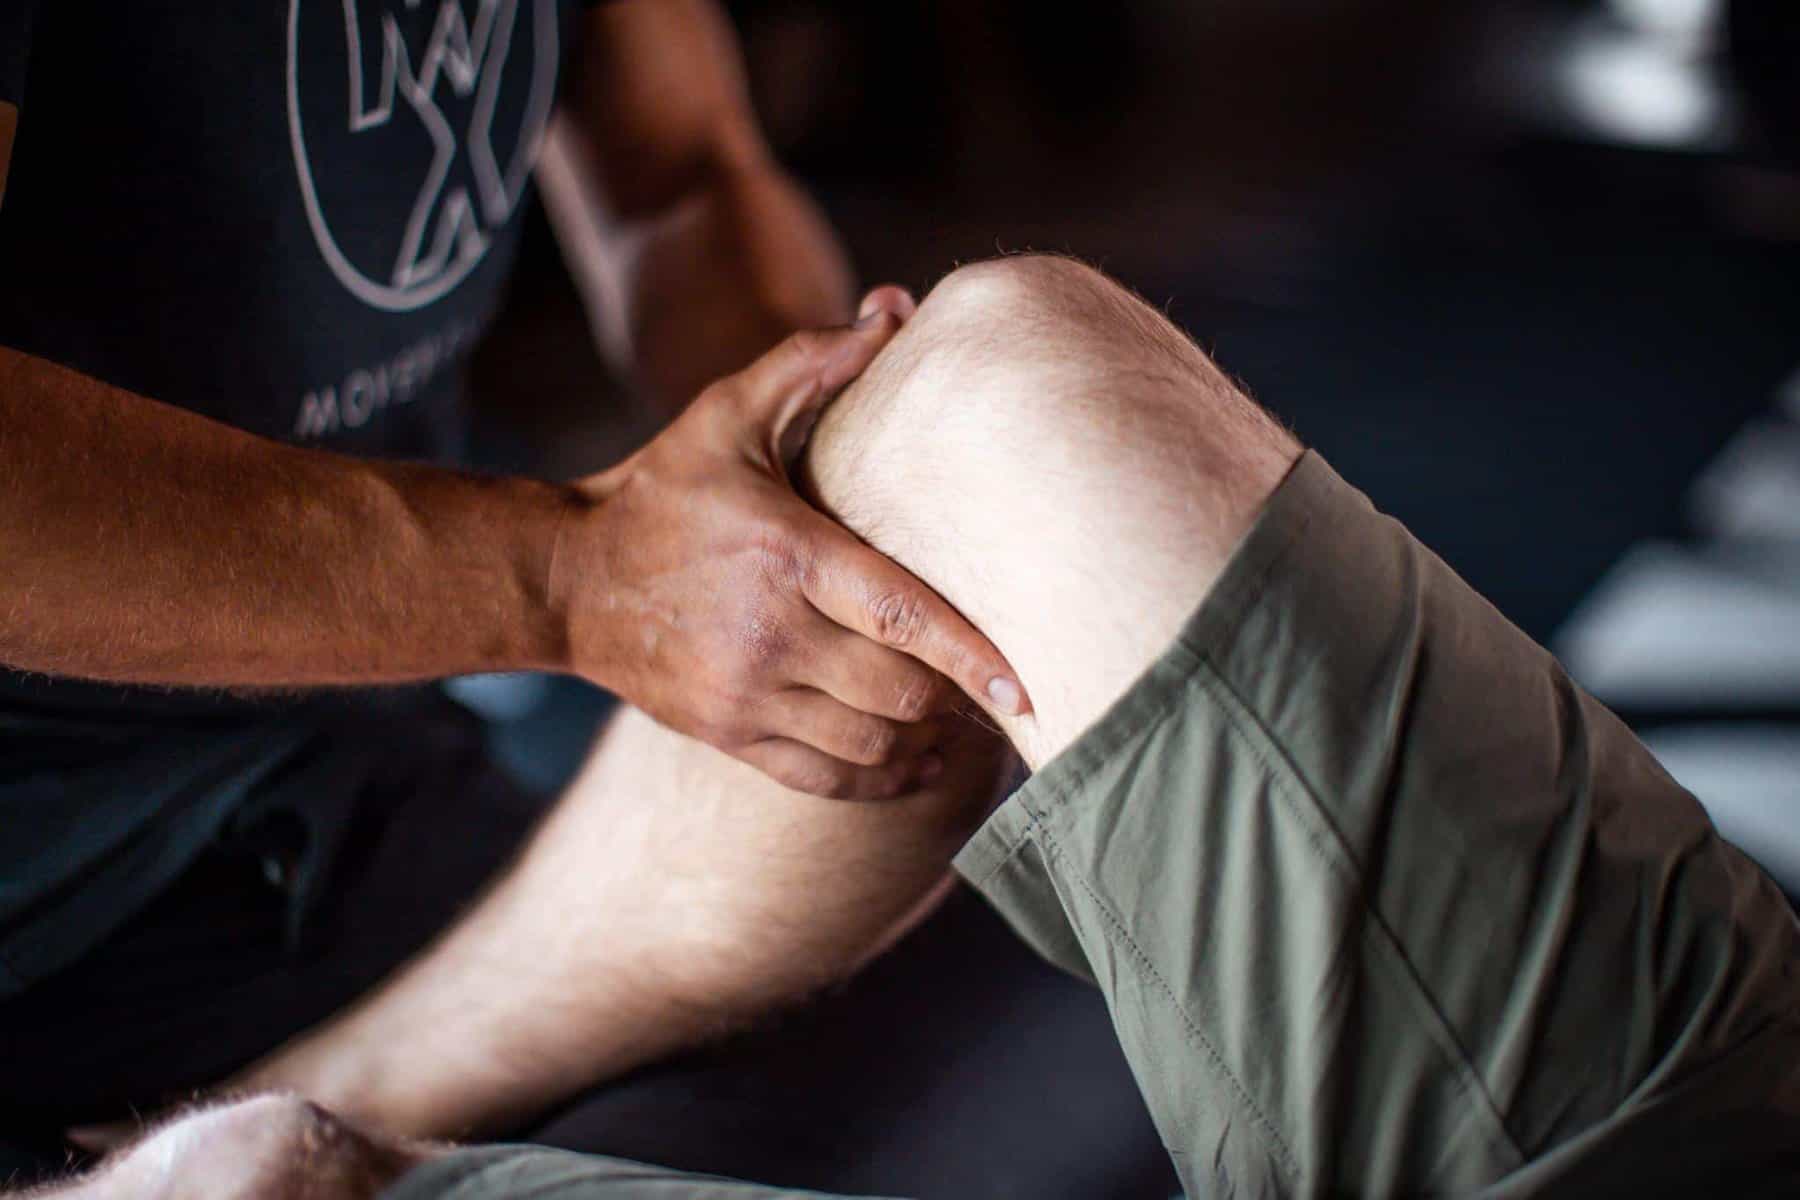 physical therapist performing a hands-on manual therapy technique to improve knee mobility and range of motion on a patient with knee pain